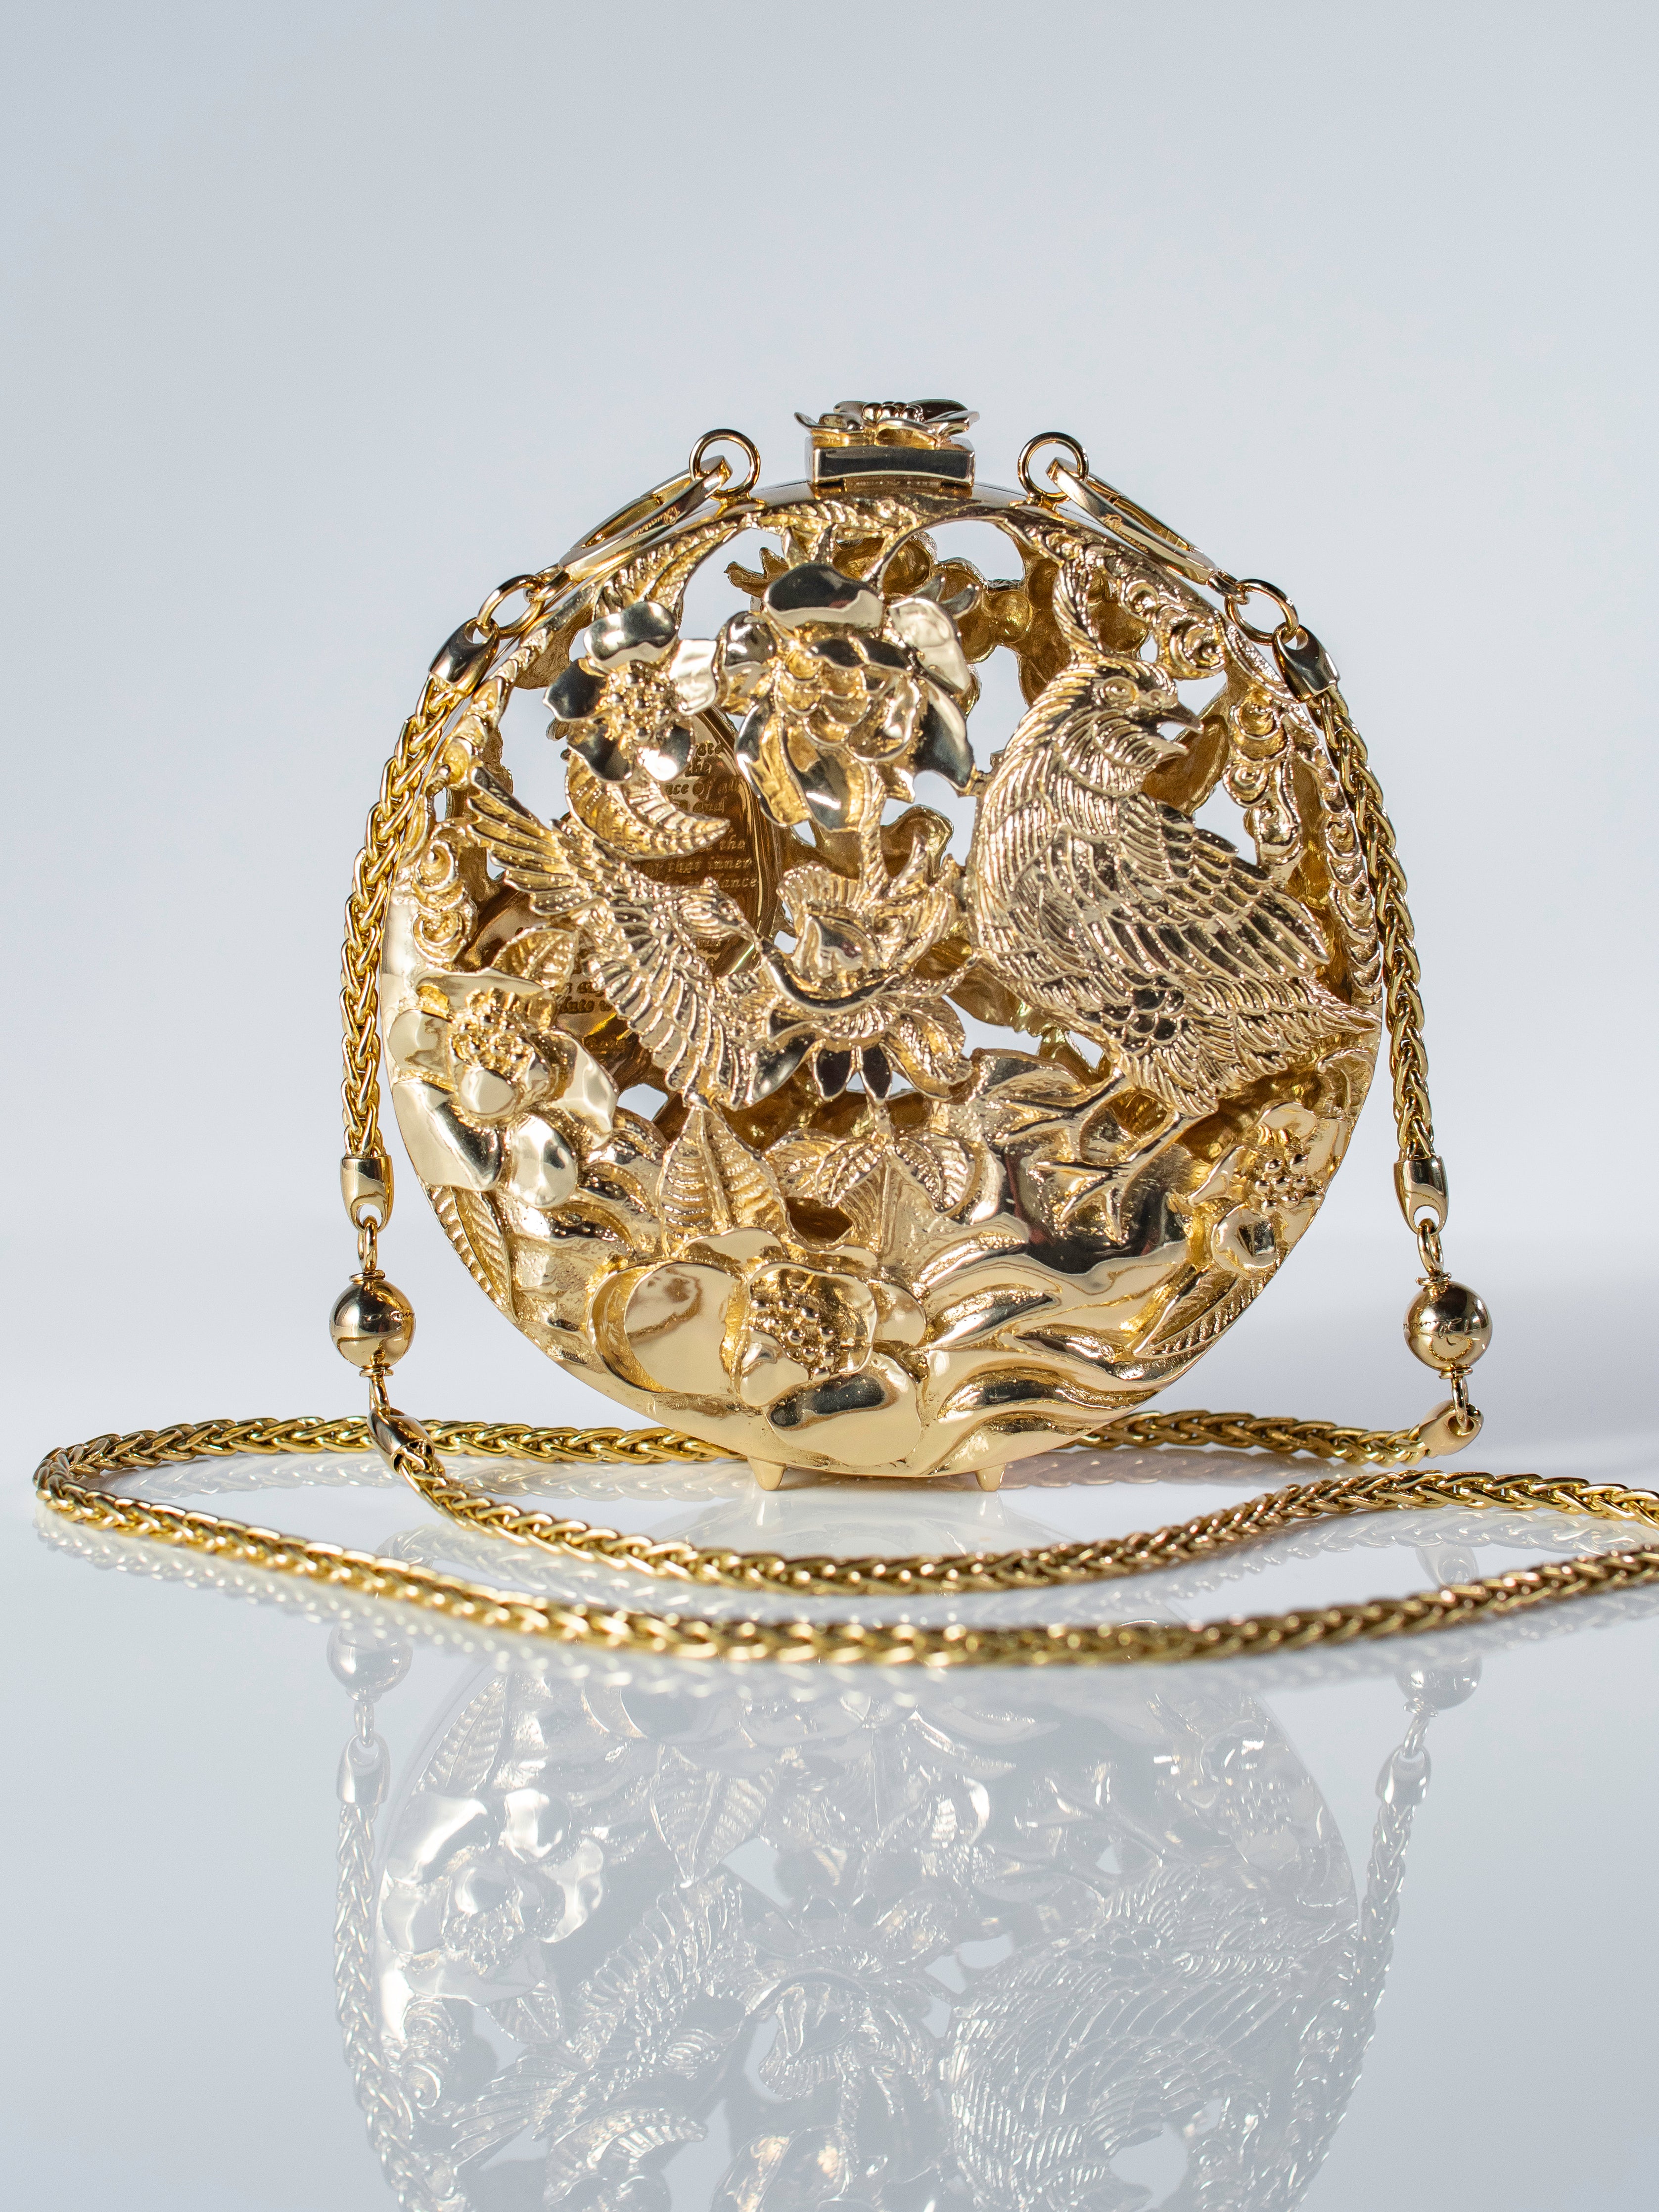 Illustrious Hand-carved brass purse. The ultimate luxury handbag. The New It Bag.